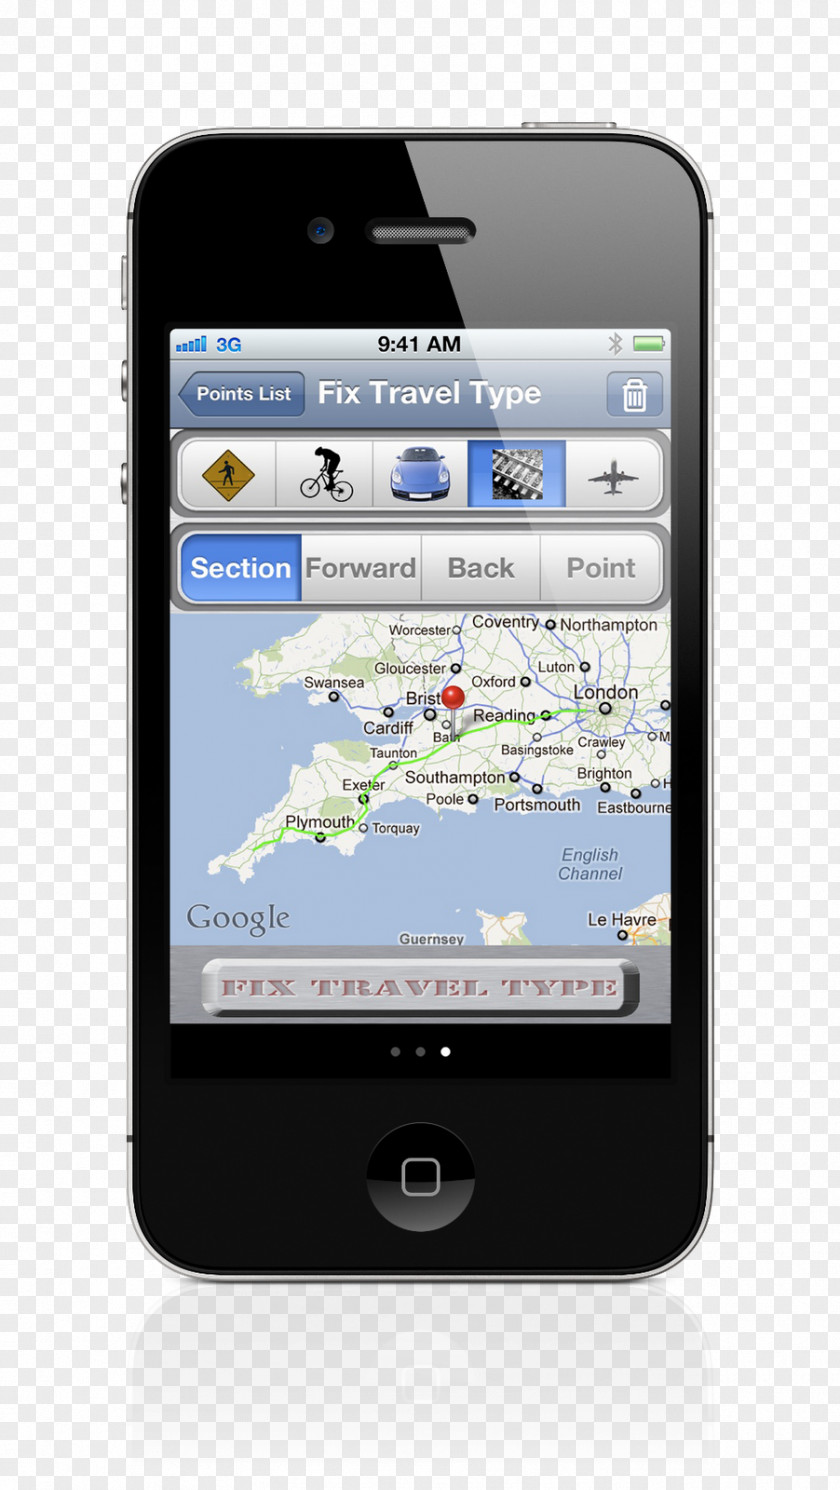 Email IPhone 4S IPod Touch App Store PNG